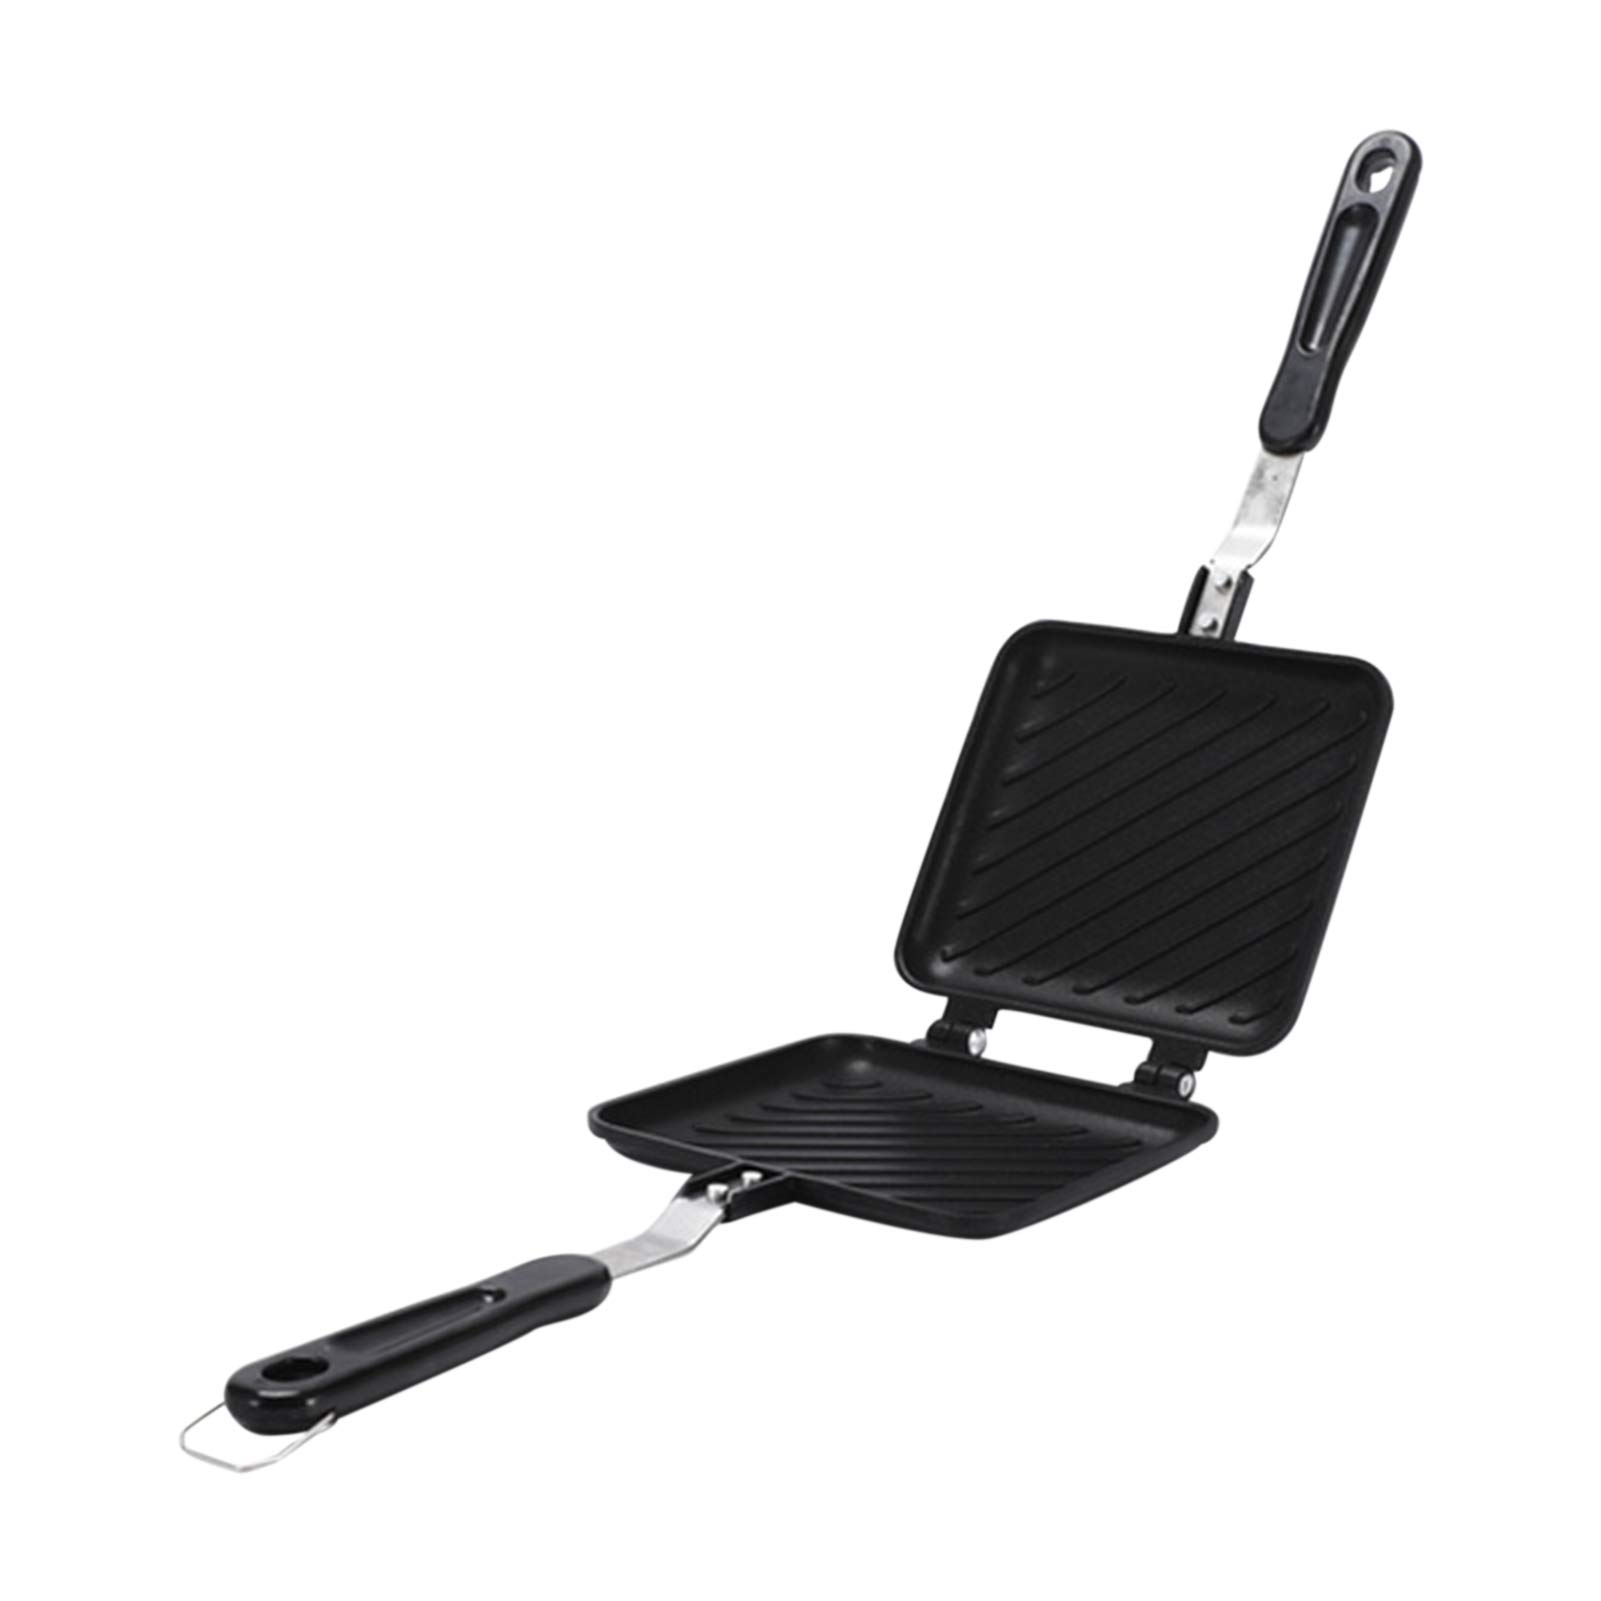 Double-Sided Frying Pan, Sandwich Maker, Double-Coated Non-Stick Grilled Sandwich and Panini Maker, Waffle Pancake Snack Griddle Pan Kitchen Tortillas Sandwich Maker